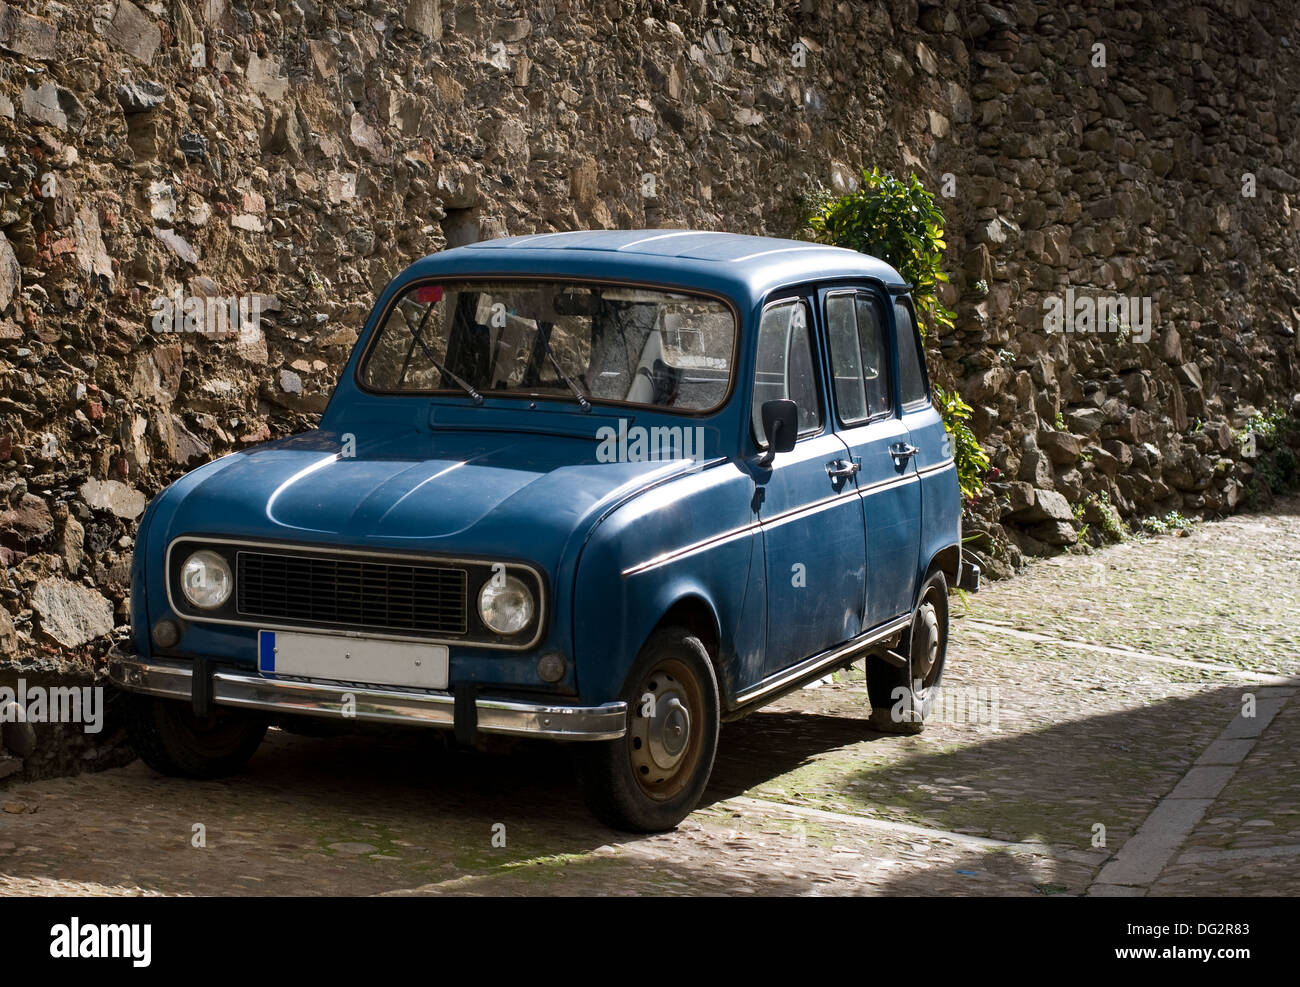 Antique blue car in rural ambient. Stock Photo